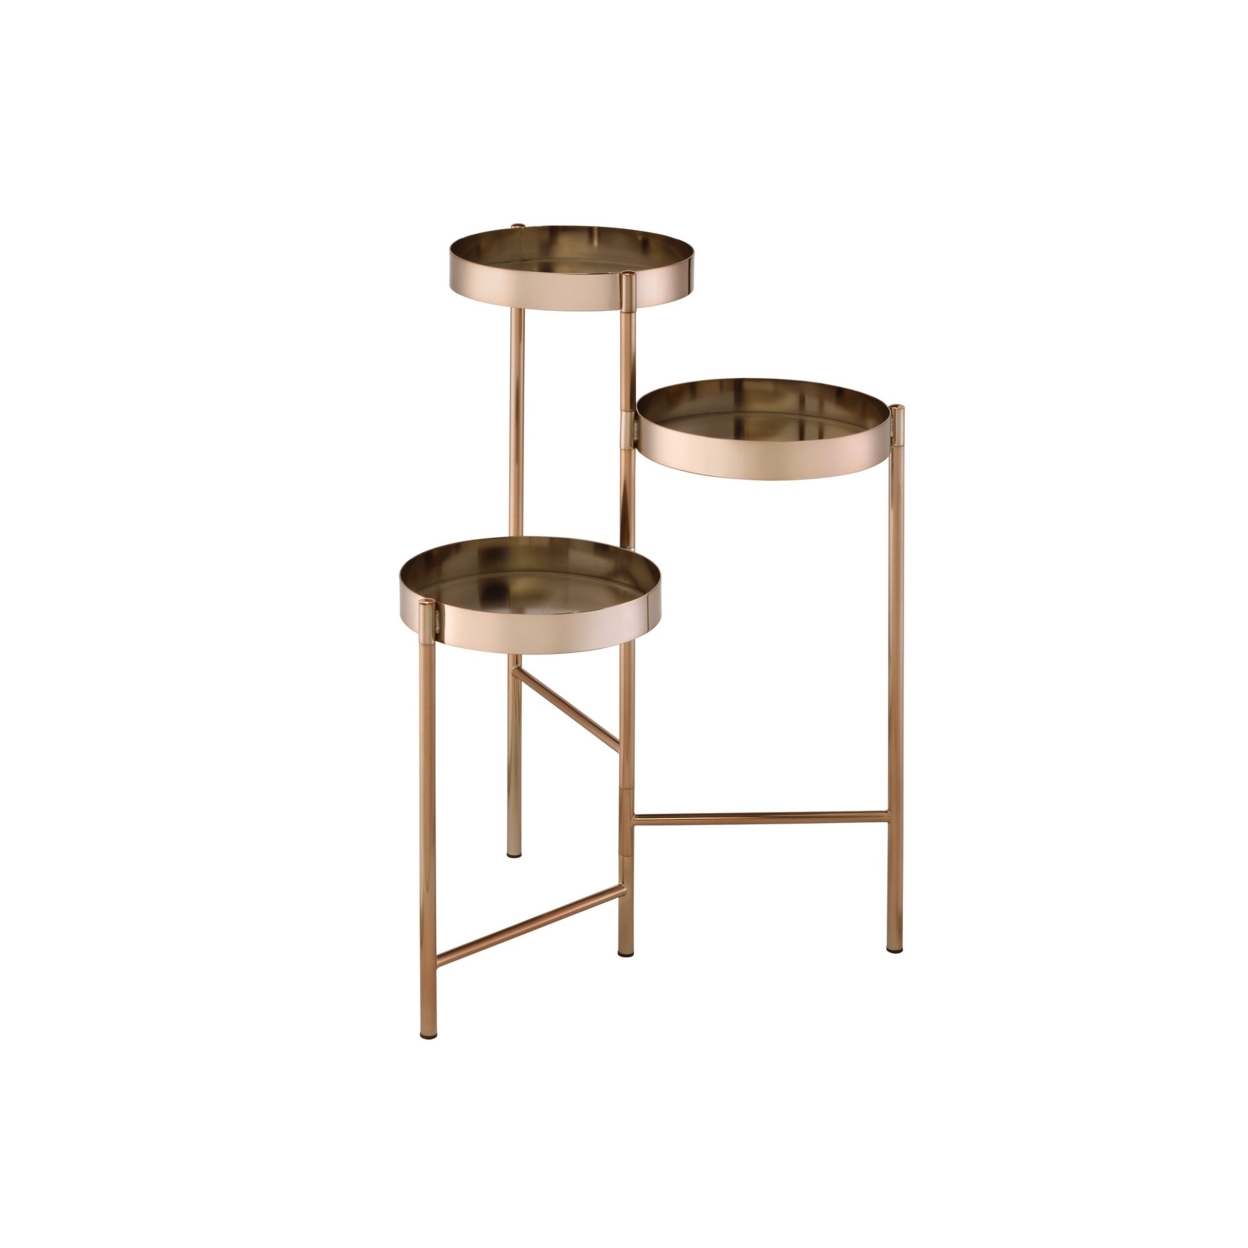 Plant Stand With 3 Tier Design And Folding Metal Frame, Gold- Saltoro Sherpi